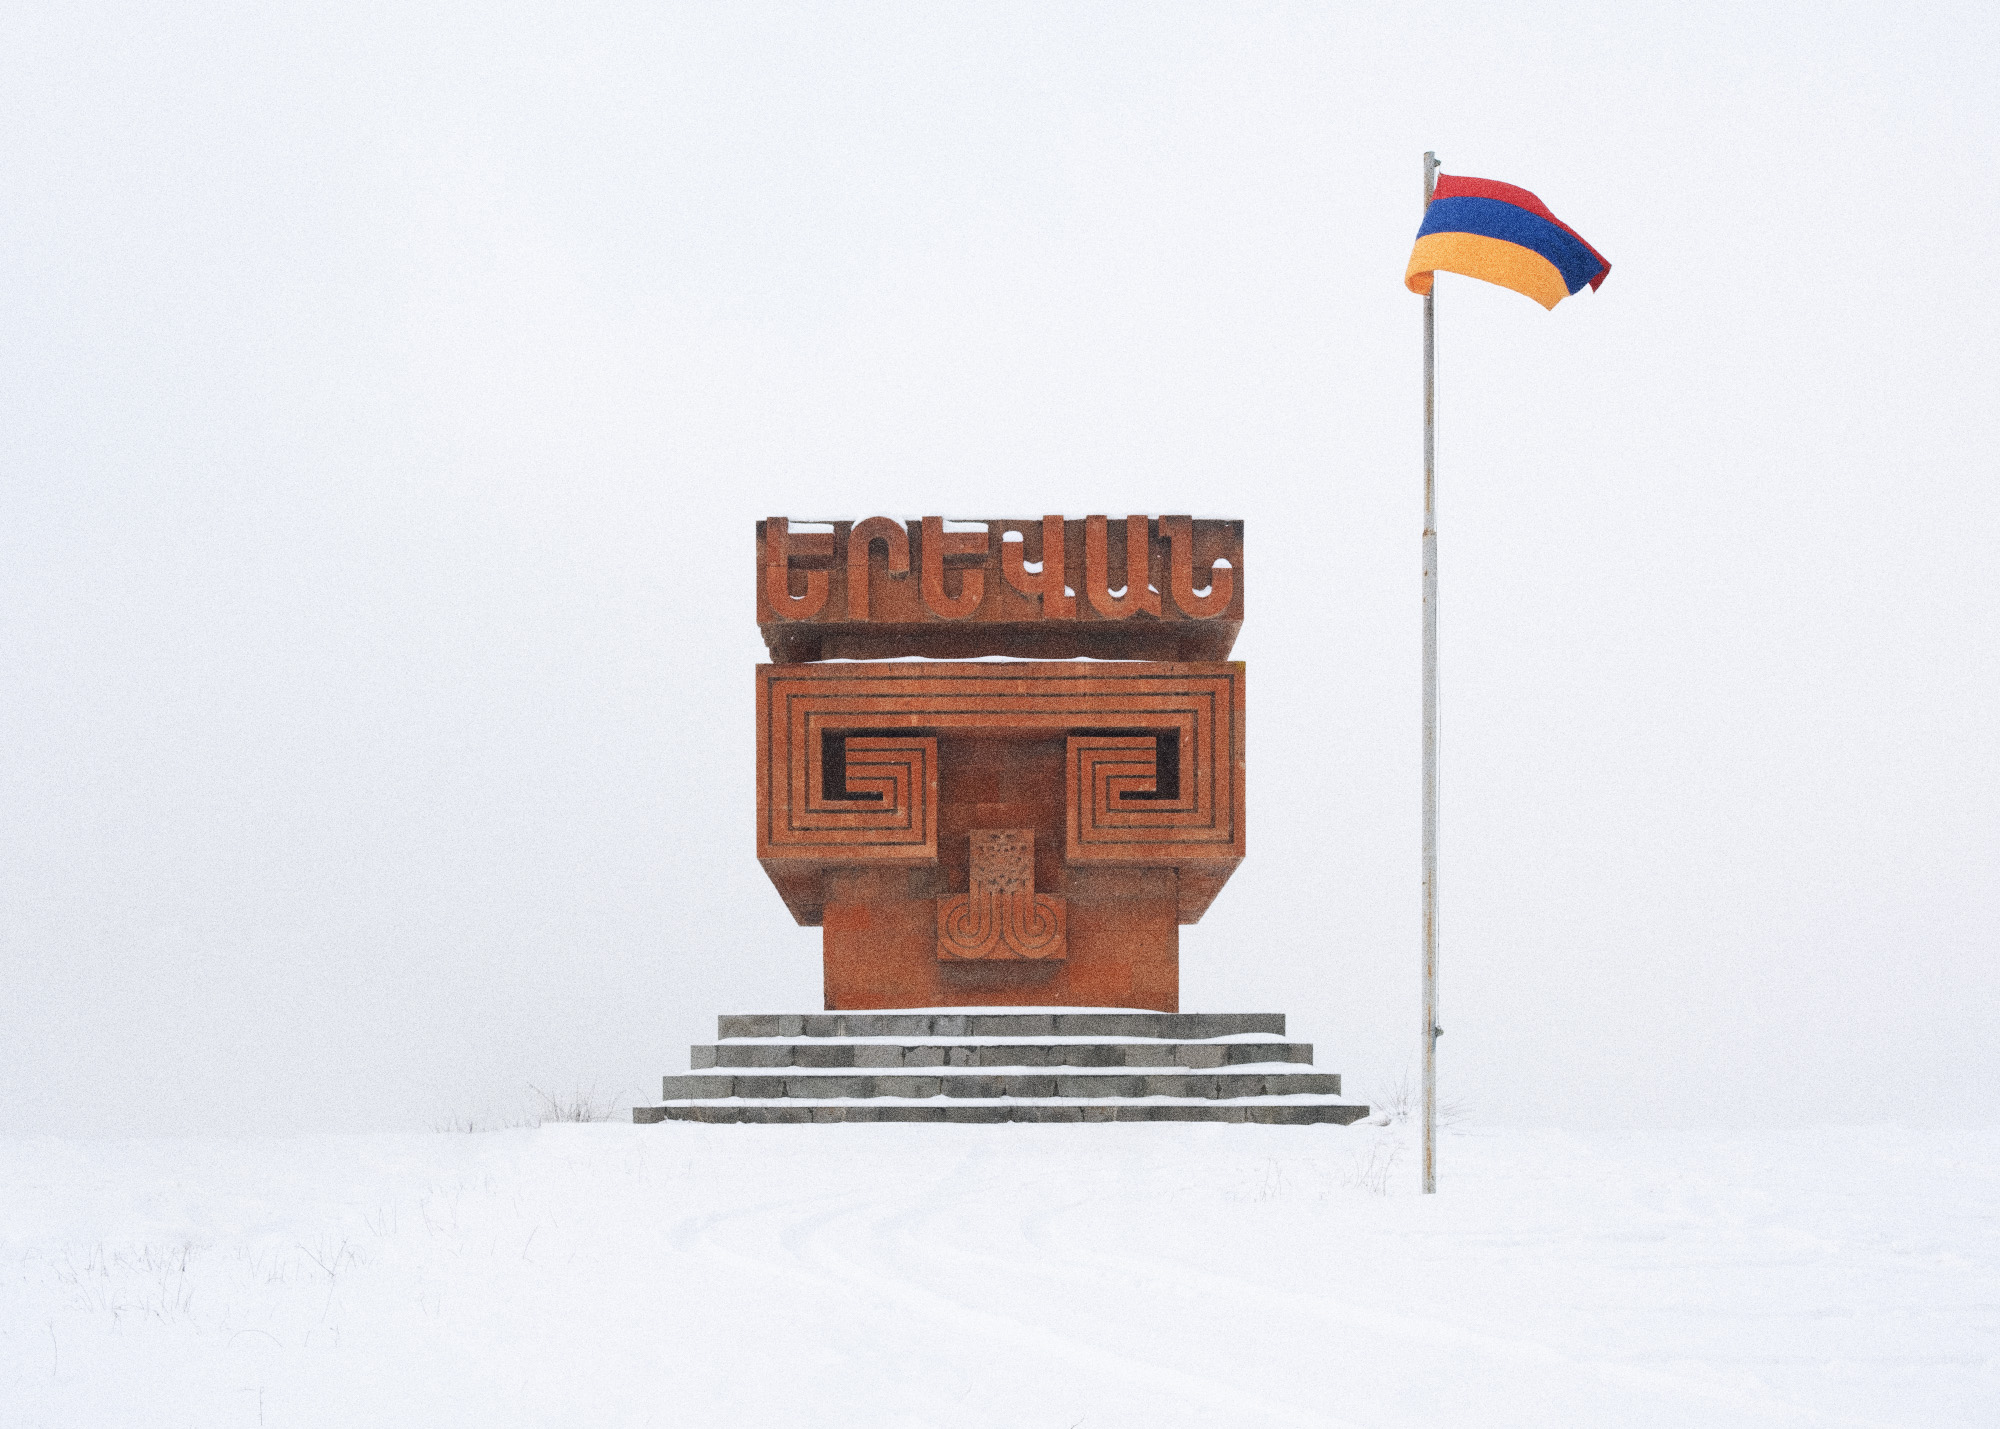 Armenia and its Soviet architectural heritage